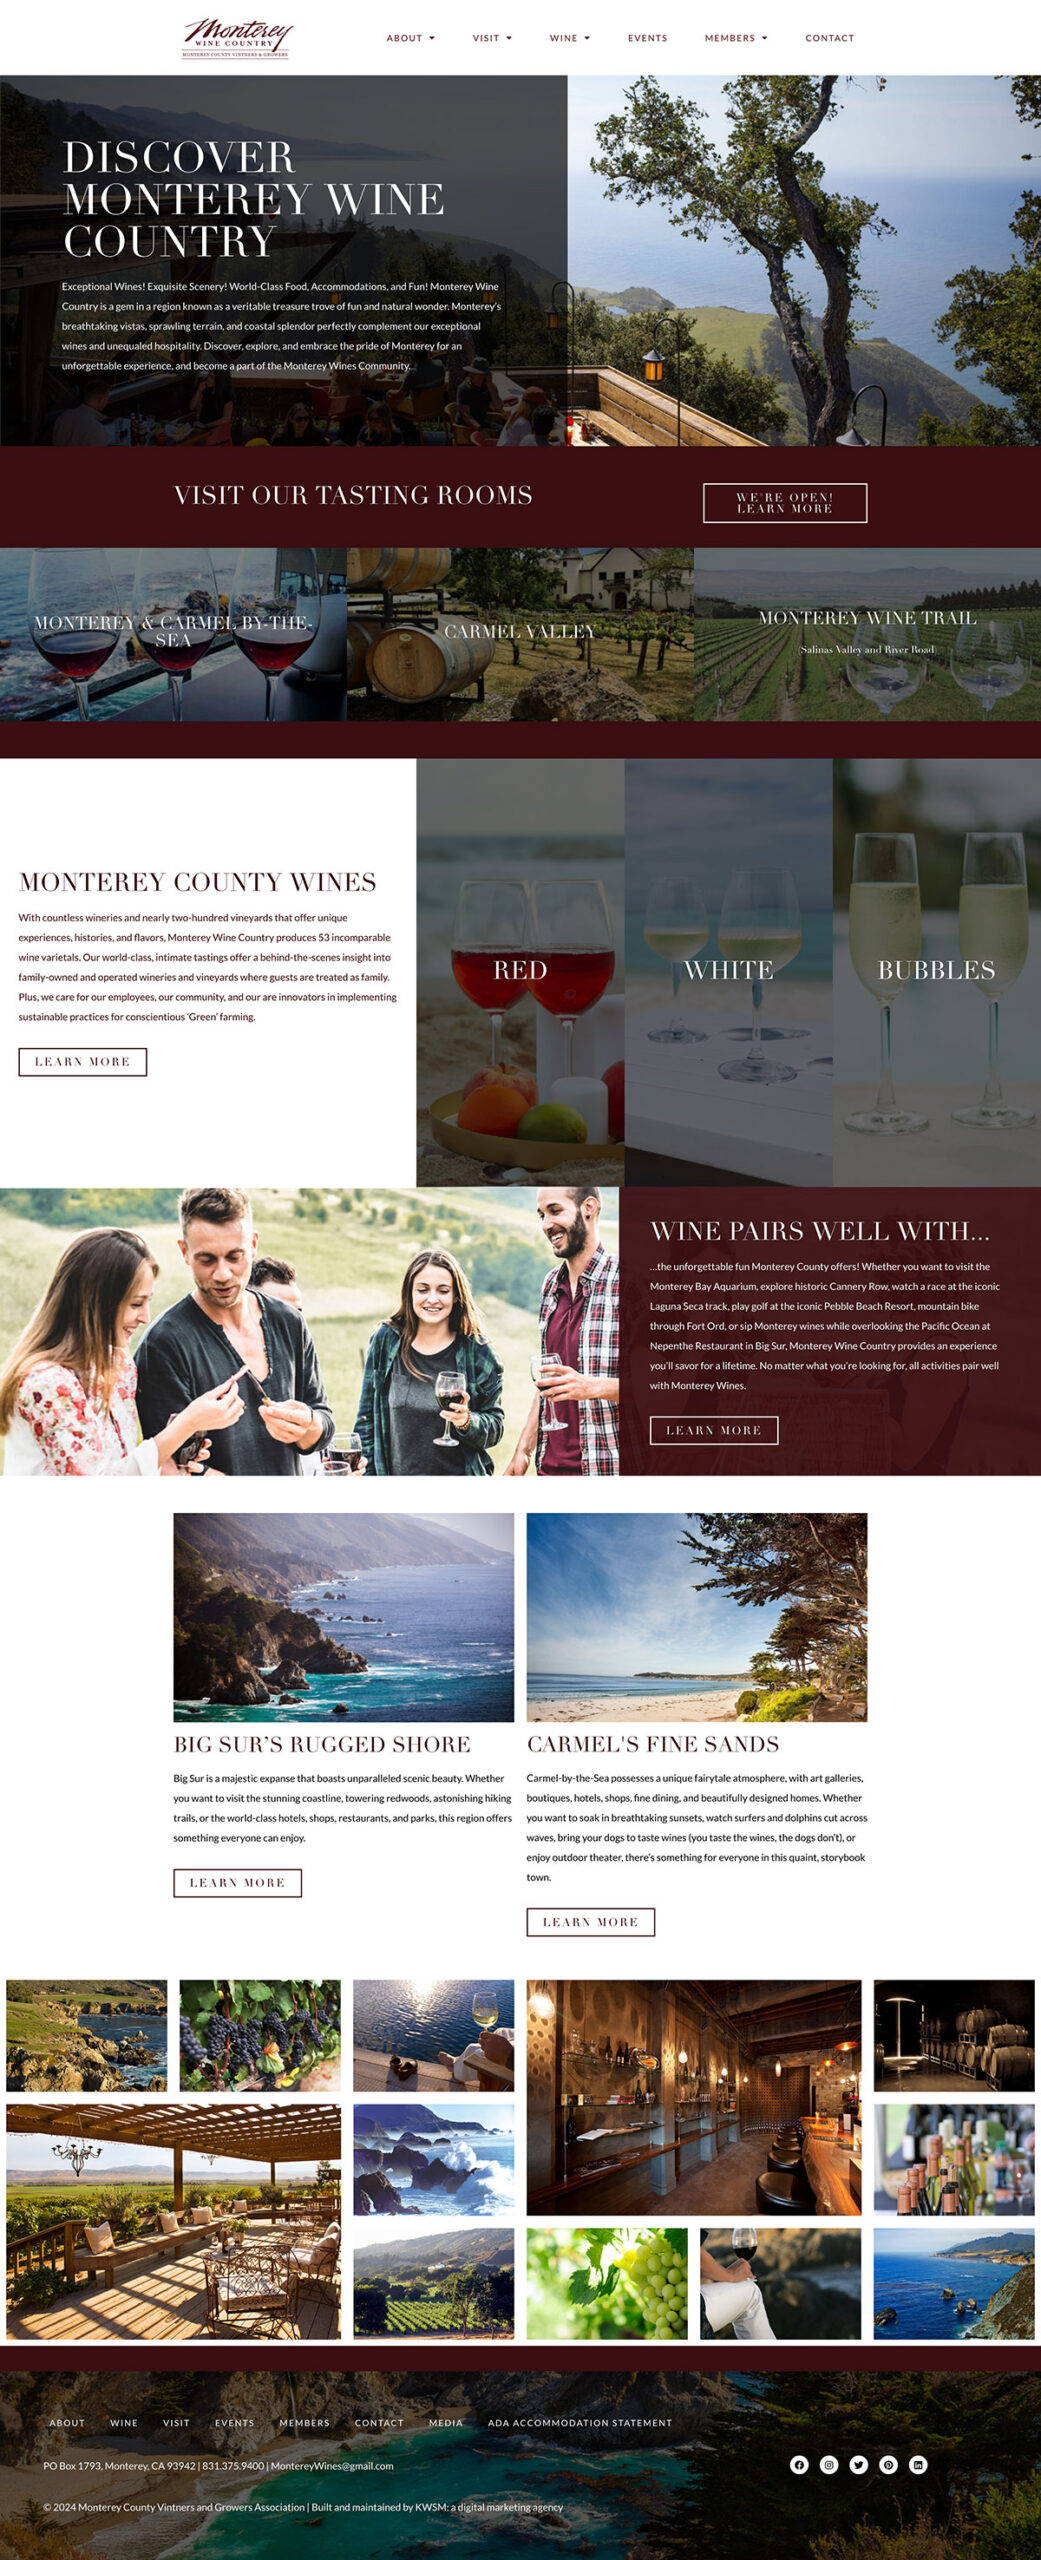 Web Design Services for Monterey County Vintners and Growers Association